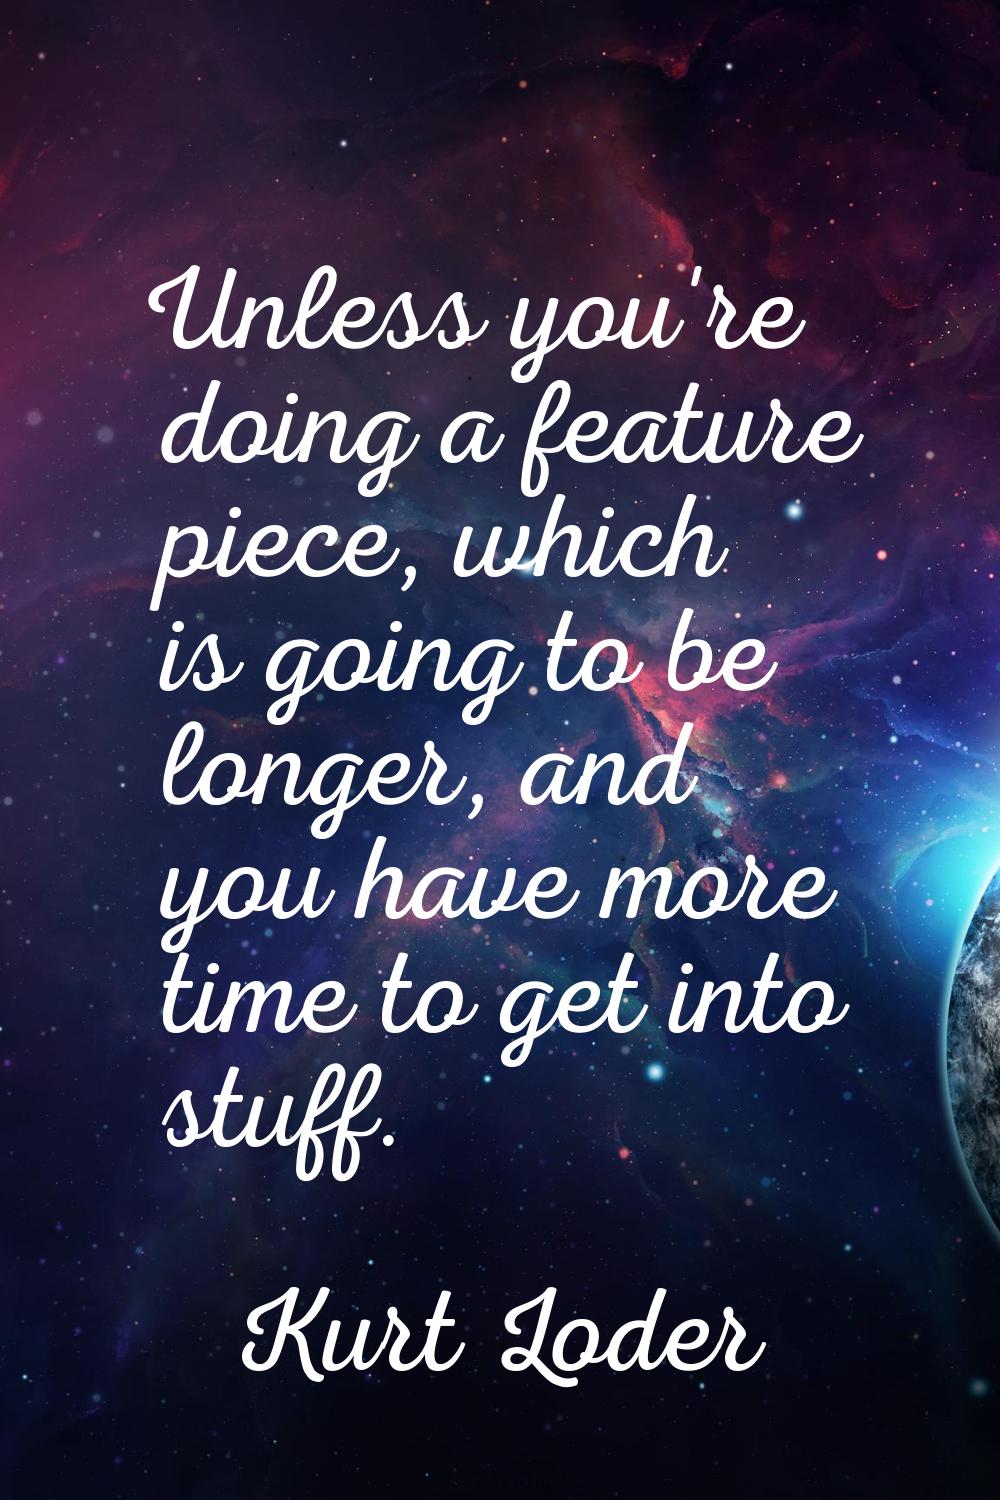 Unless you're doing a feature piece, which is going to be longer, and you have more time to get int